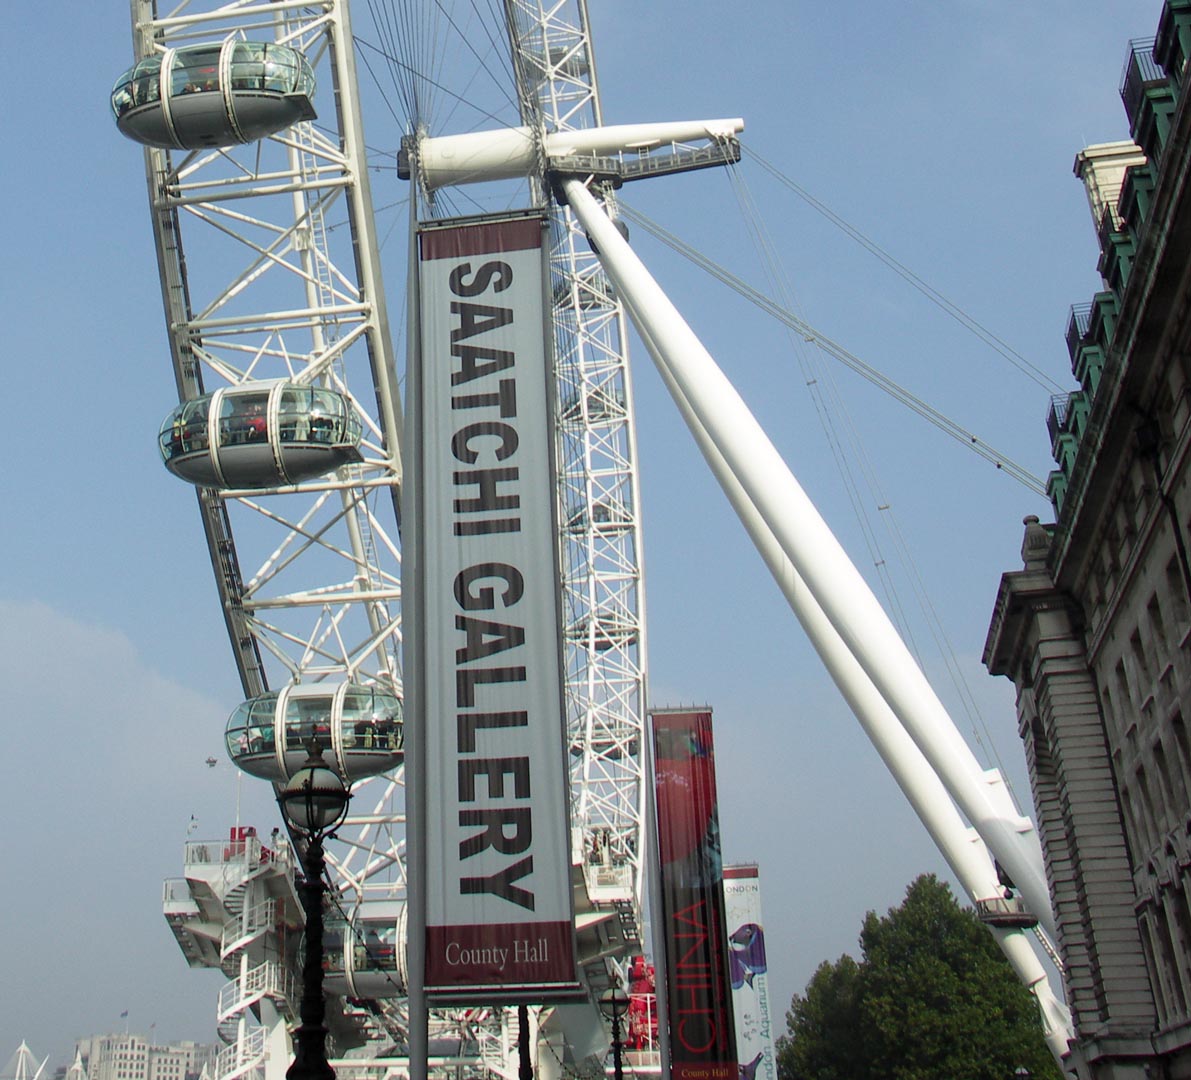 The Coca-Cola London Eye is centrally located in the heart of the capital